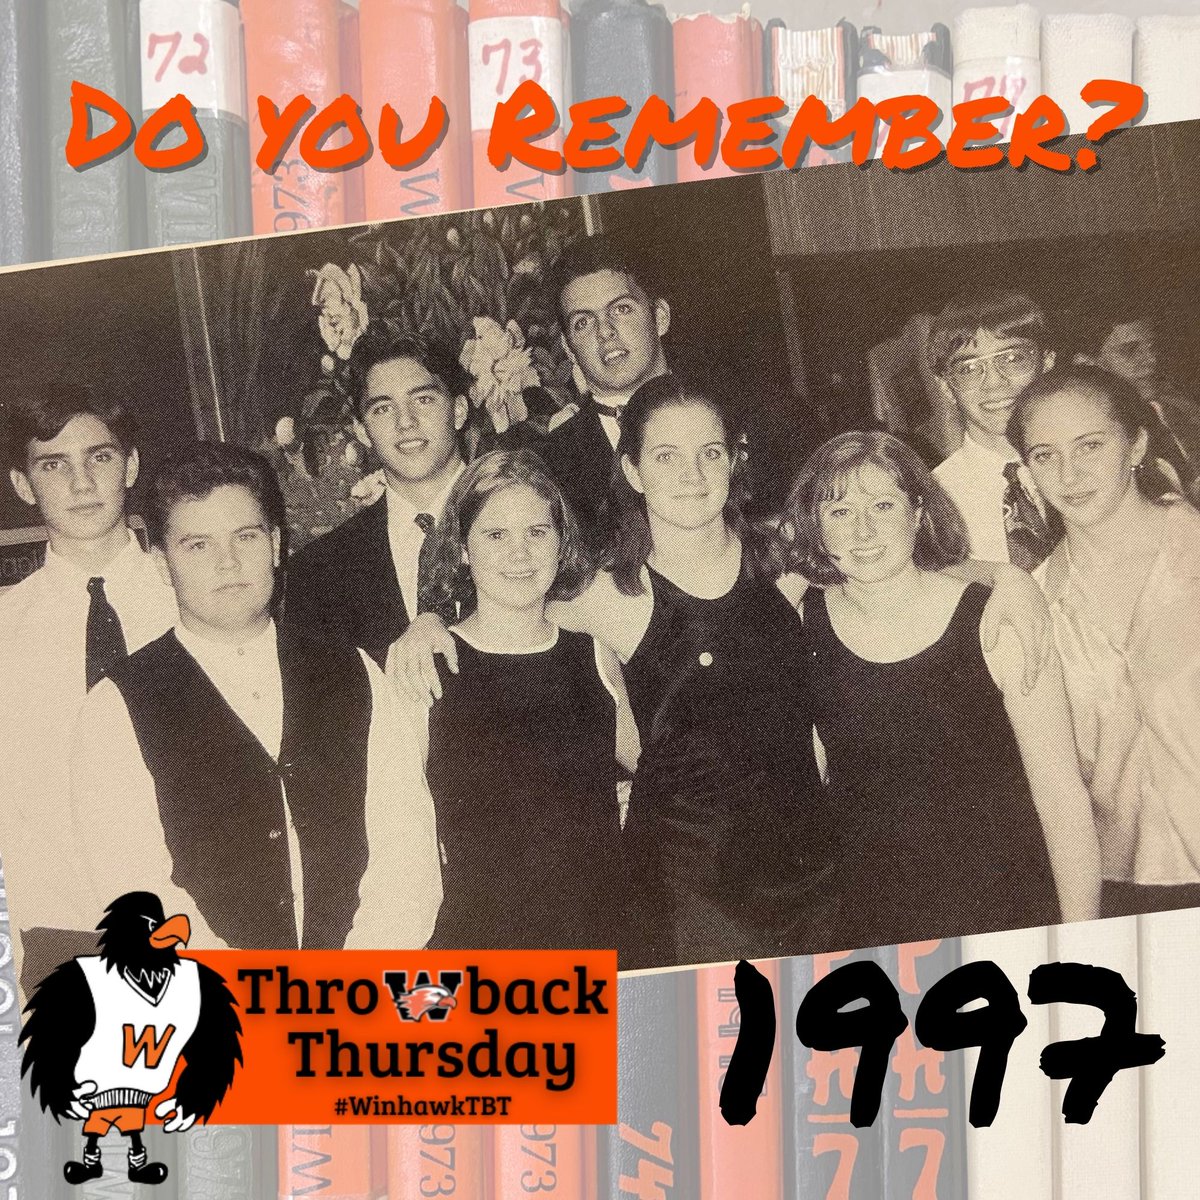 Today's #WinhawkTBT remembers the National Honor Society members who traveled to the national conference in 1997. Front row: Jon Lowery, Dee Dee Downie, Rachel Gaffron, Katrina Seitz, Jackie Toulouse. Back row: Dale Honsey, Peter Frosch, Thor Lossen, Chris Kauffman. #WinhawkProud https://t.co/6ivb6aoB5D